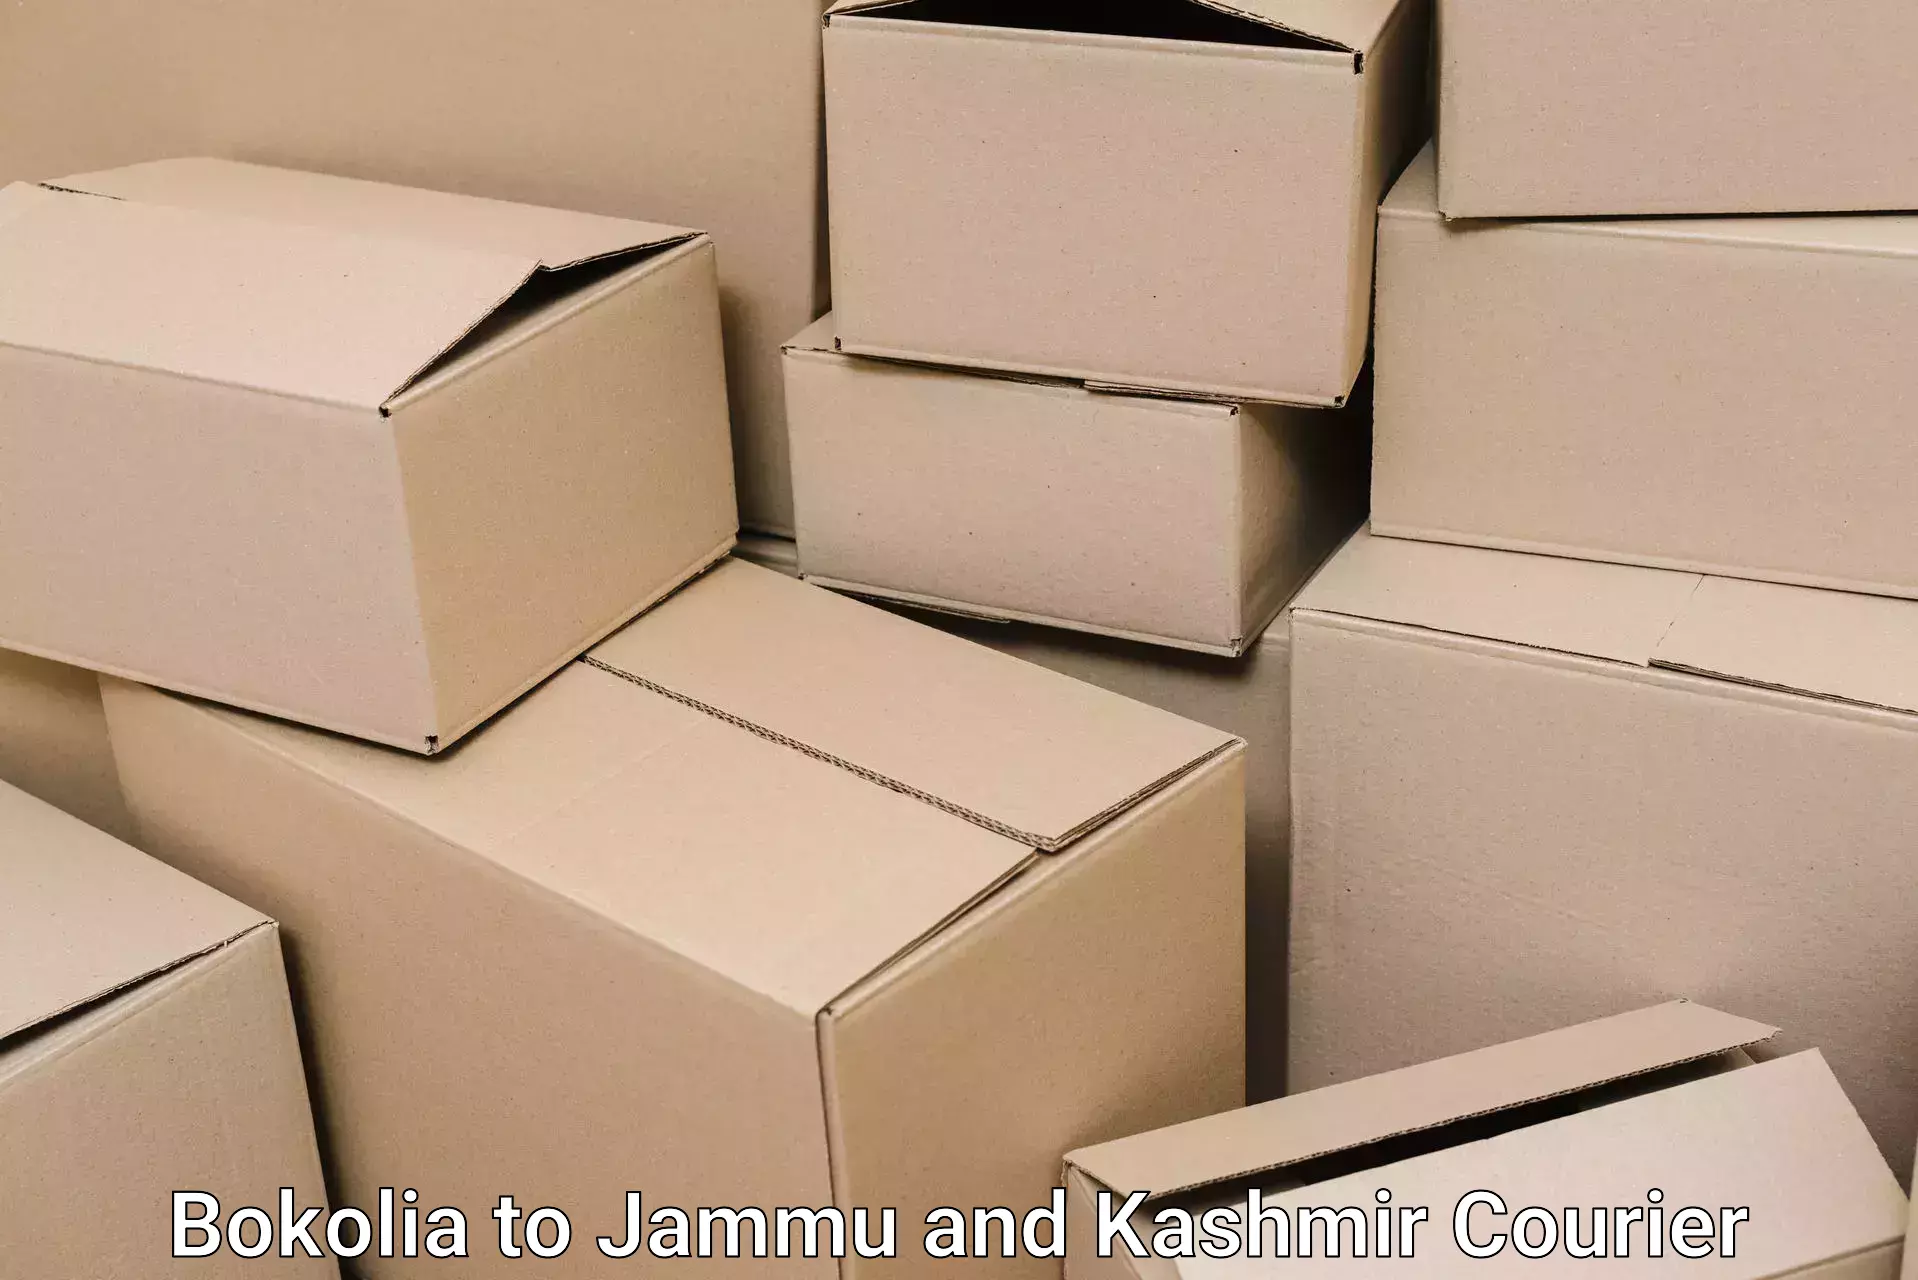 Furniture moving specialists Bokolia to Jammu and Kashmir